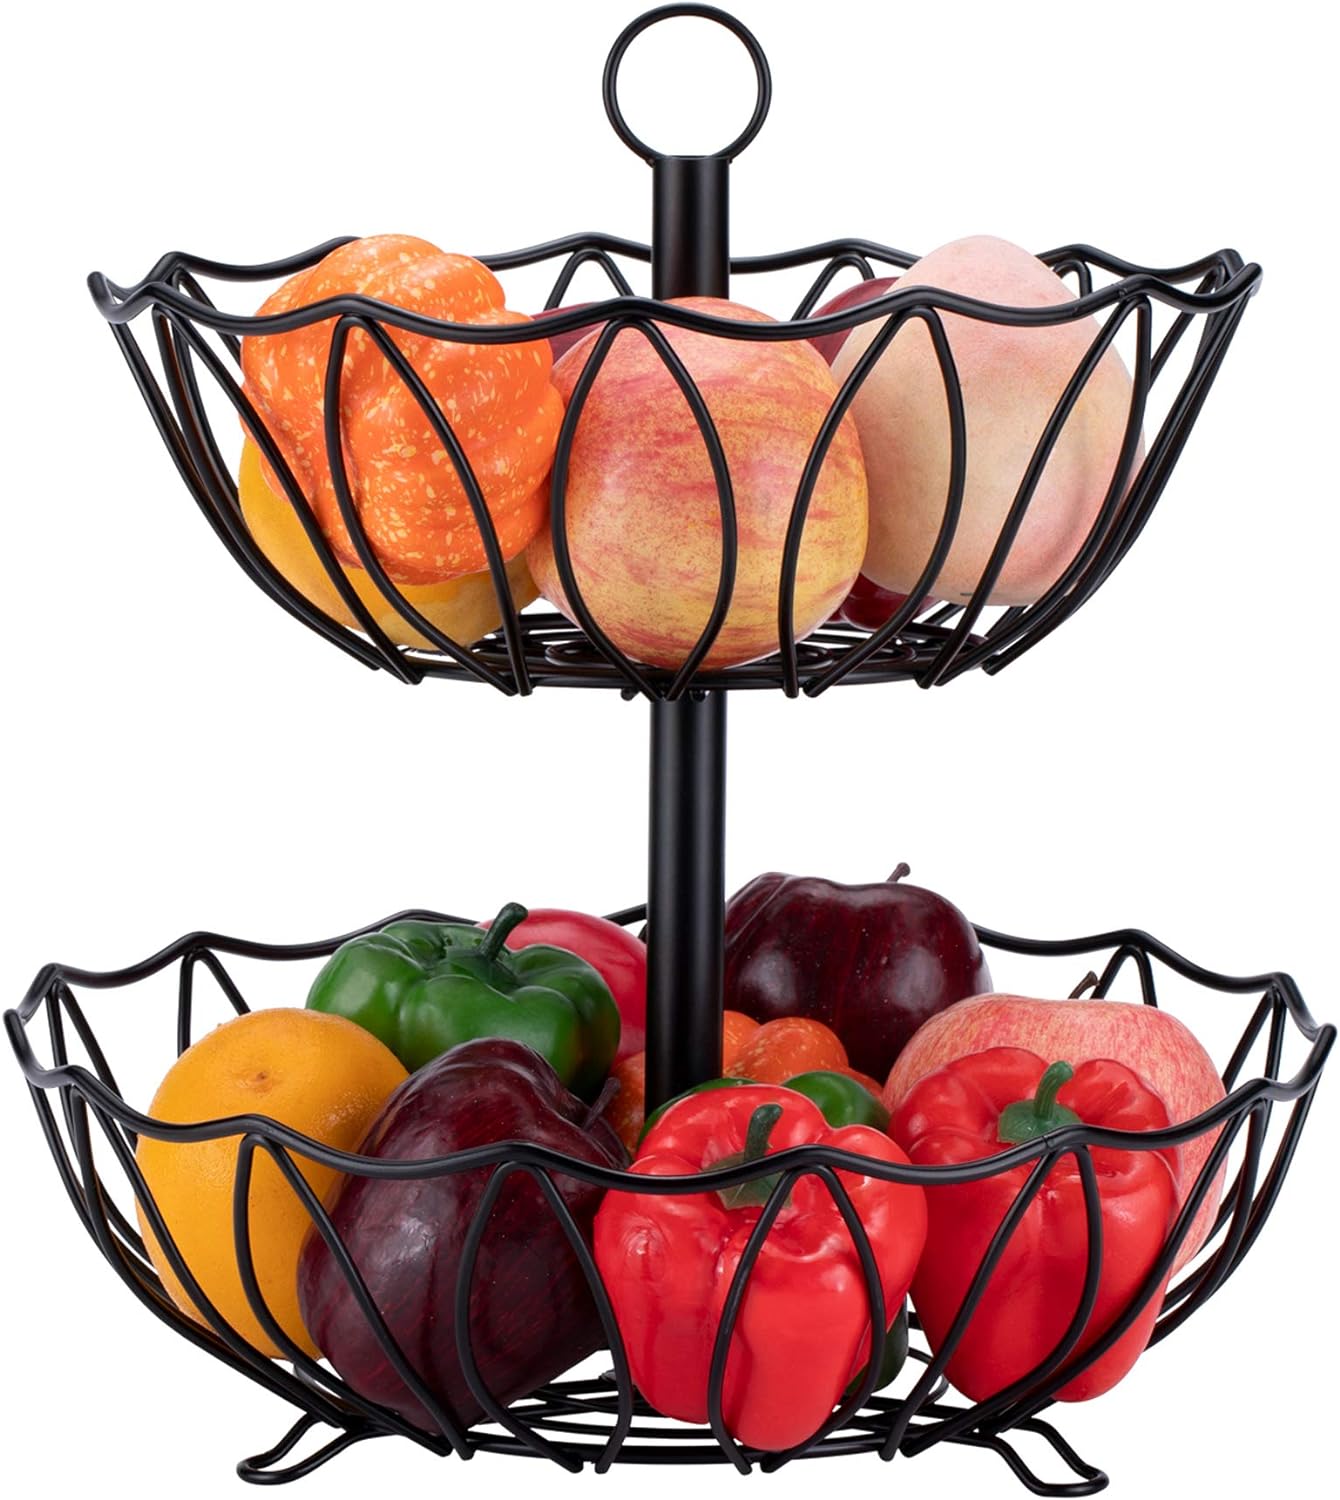  FlagShip 2 Tier Fruit Basket Stand Vegetable Fruit Wire Basket Holder Rack Metal Cast Iron with Handle for Kitchen Home Countertop Bathroom 